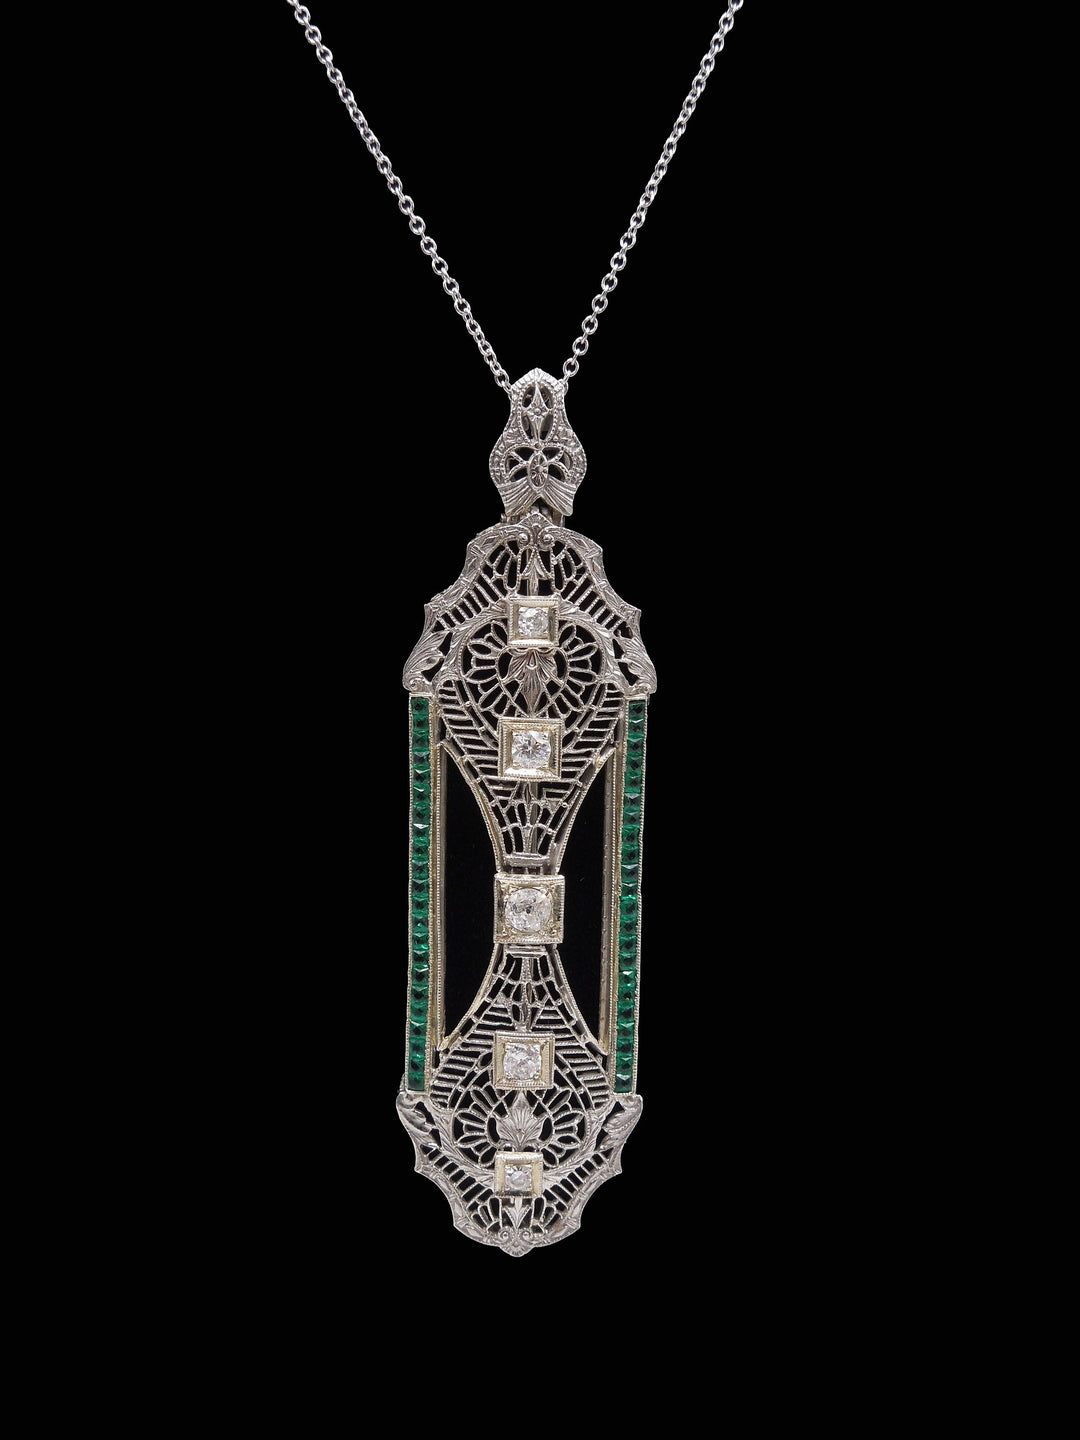 Antique Filigree Platinum Brooch/Bar Pin/Pendant Necklace with Diamonds and Emeralds